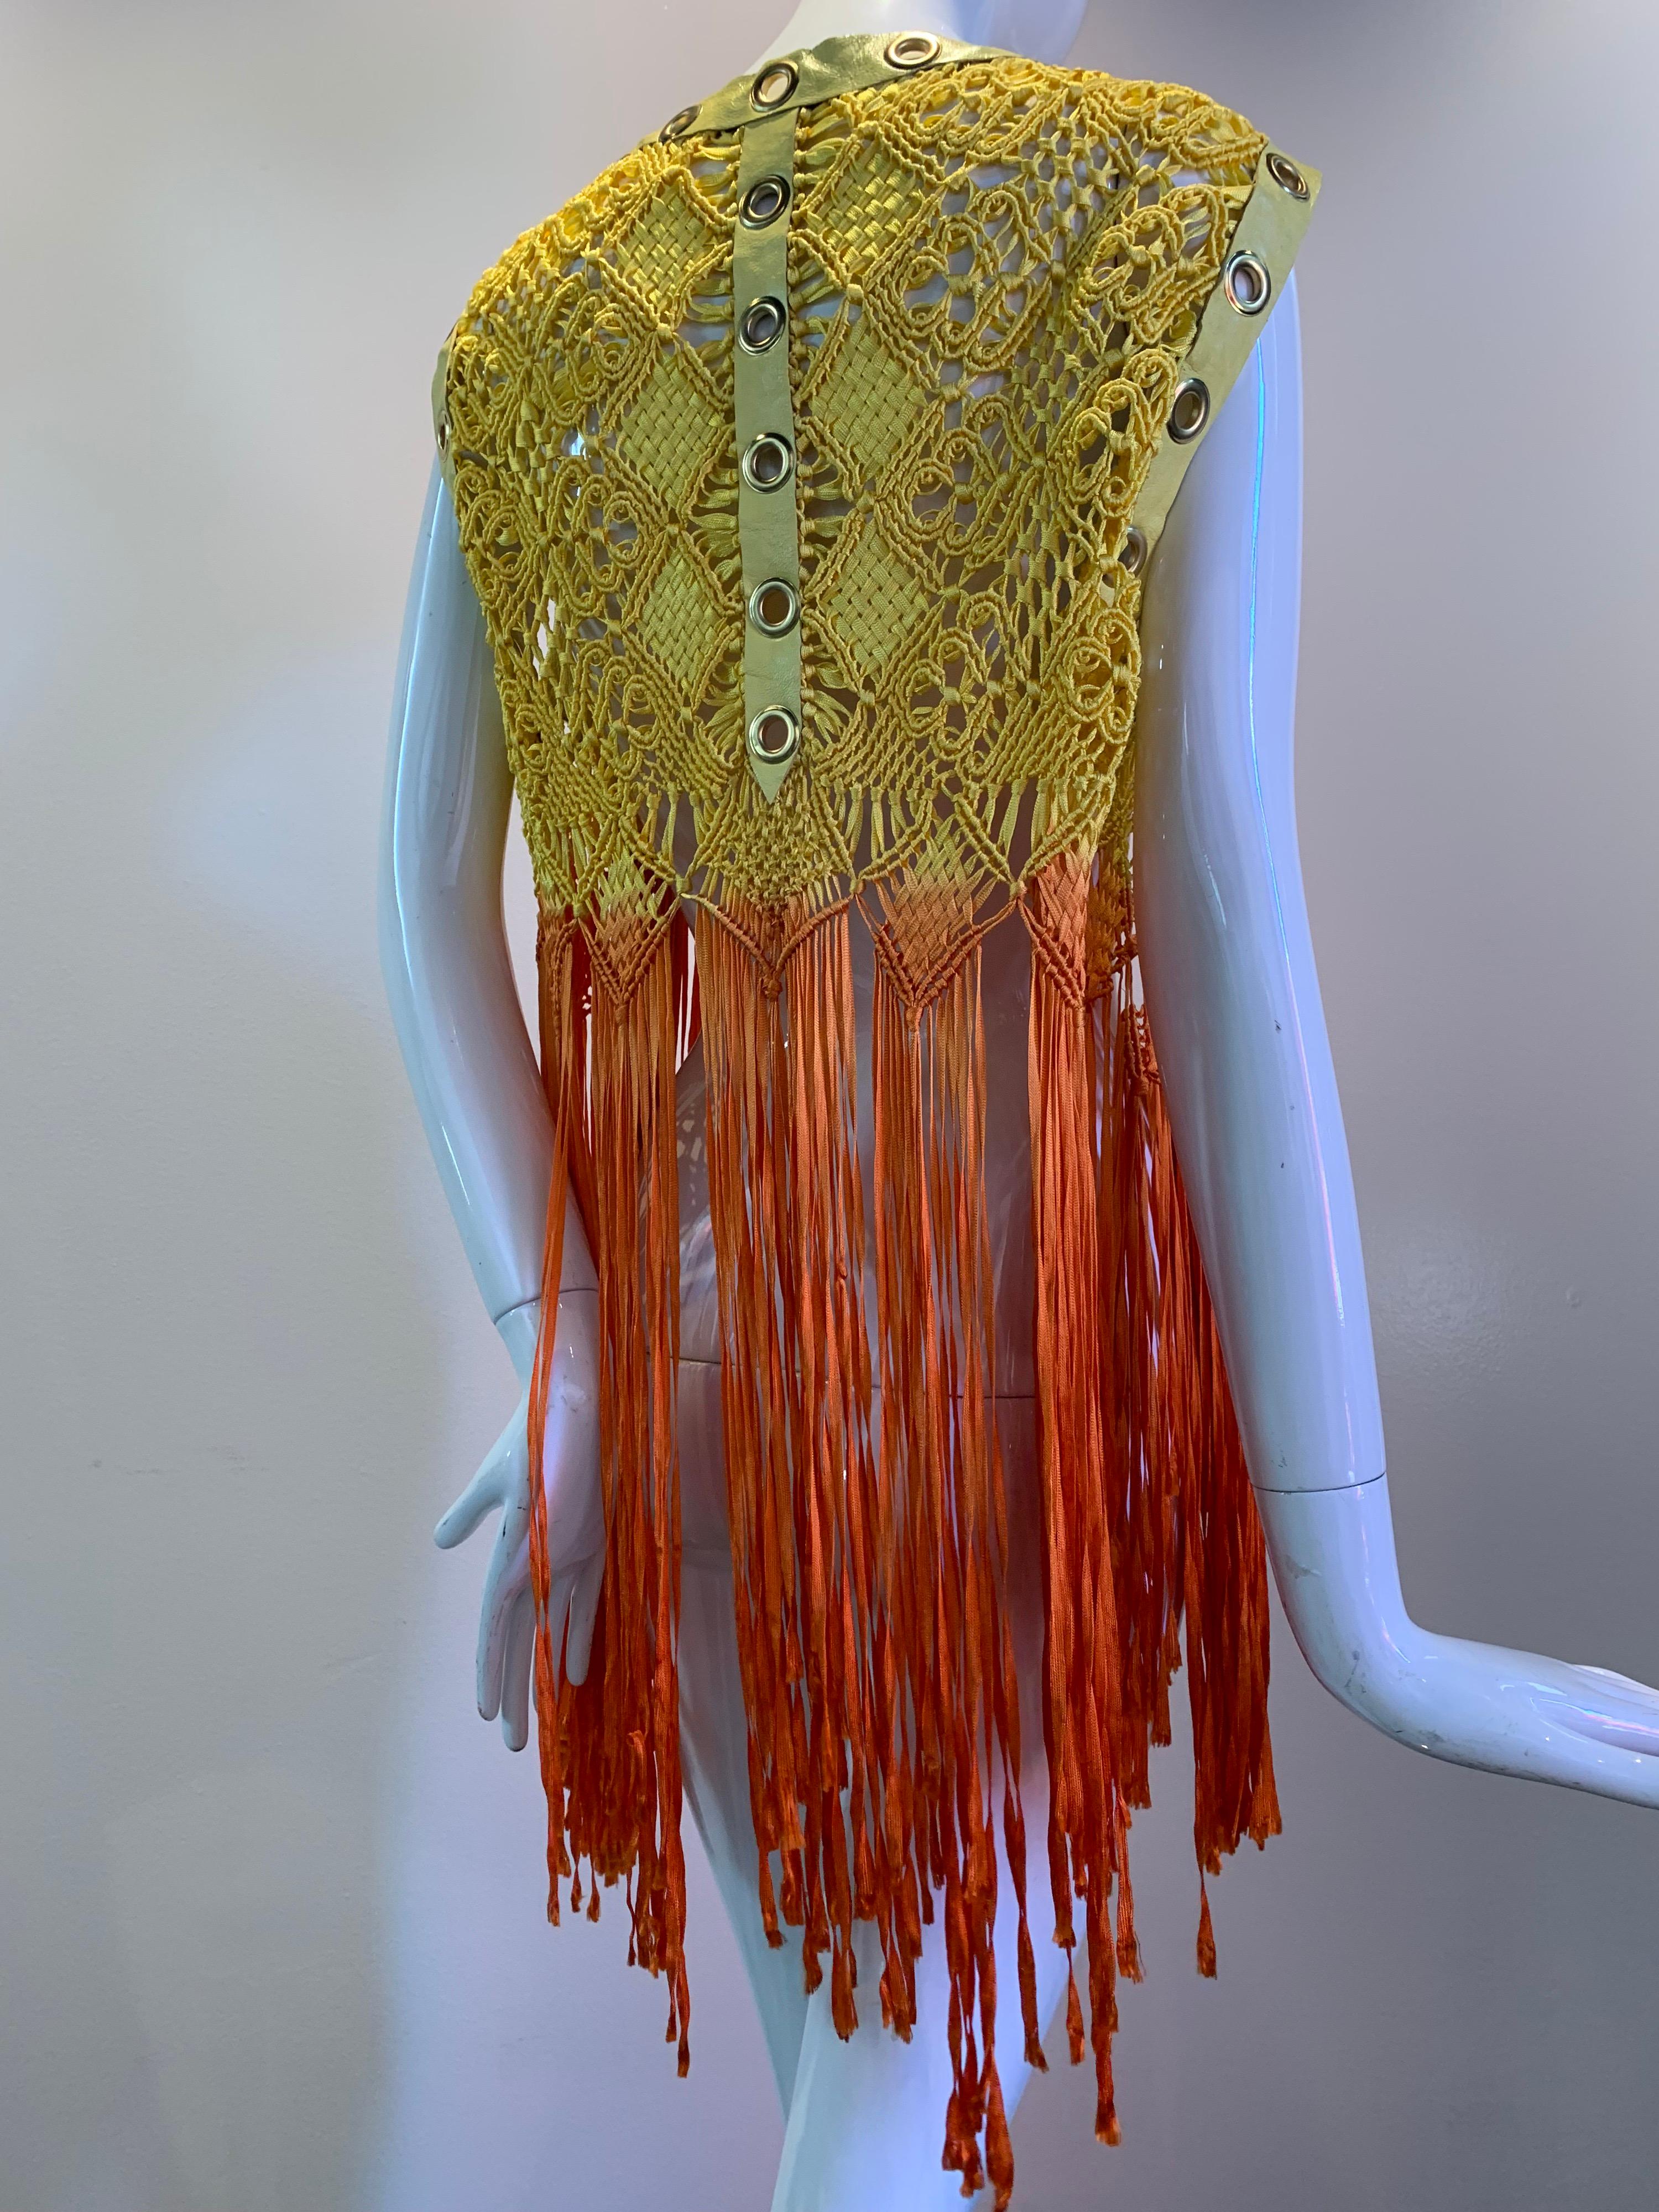 Torso Creations Ombre-Dyed Canary Macrame Vest W/ Leather And Eyelet Trim  In Excellent Condition For Sale In Gresham, OR